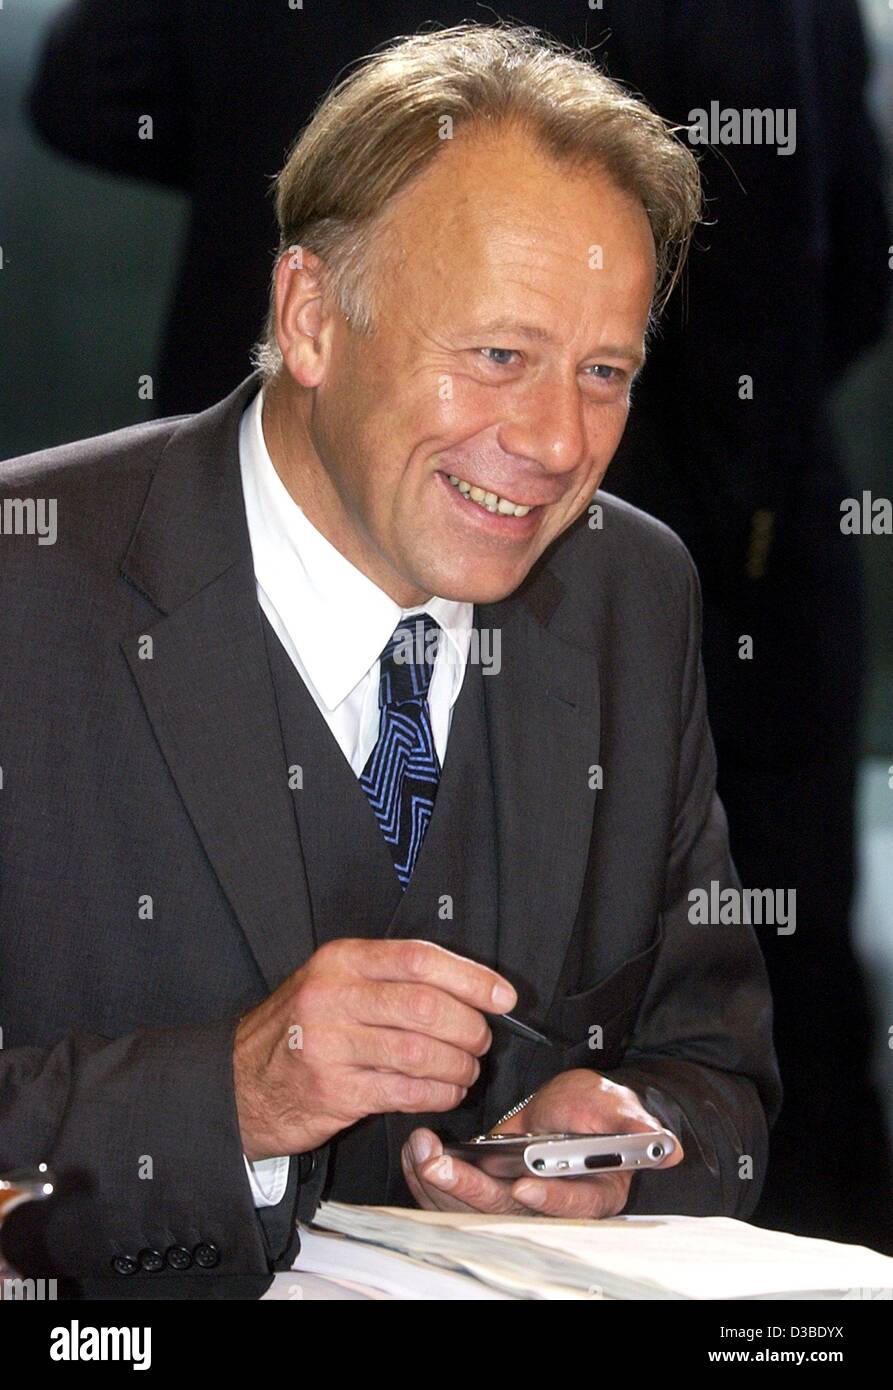 (dpa) - German Environment Minister Juergen Trittin holds an organizer during the cabinet meeting in Berlin, 15 January 2003. Among others, reports on the deposit on drink cans and the law of immigration were discussed. Stock Photo